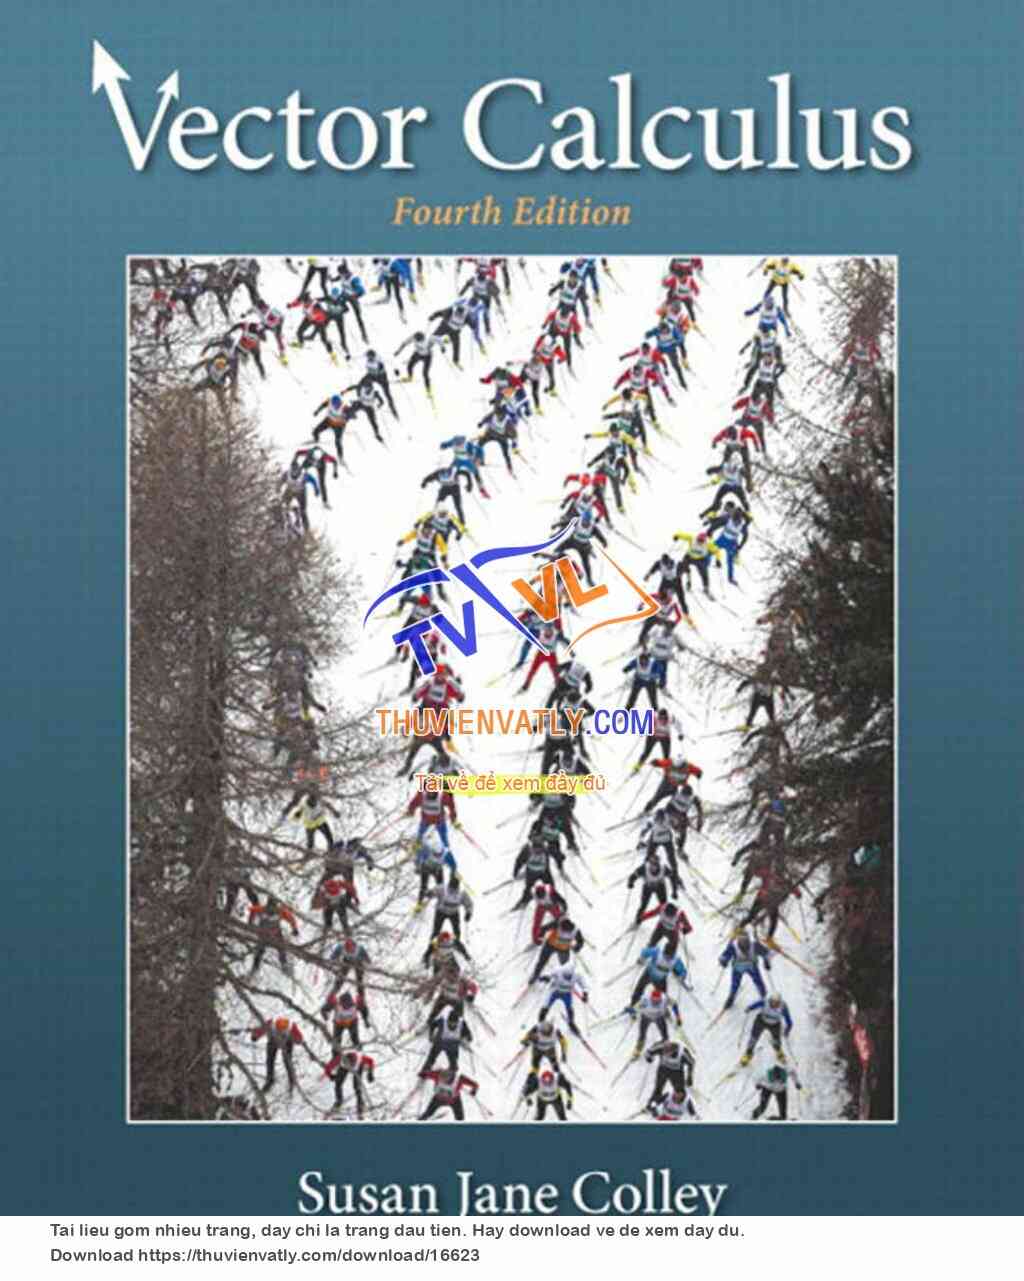 Vector Calculus, 4th edition (Susan Jane Colley, Pearson 2012)